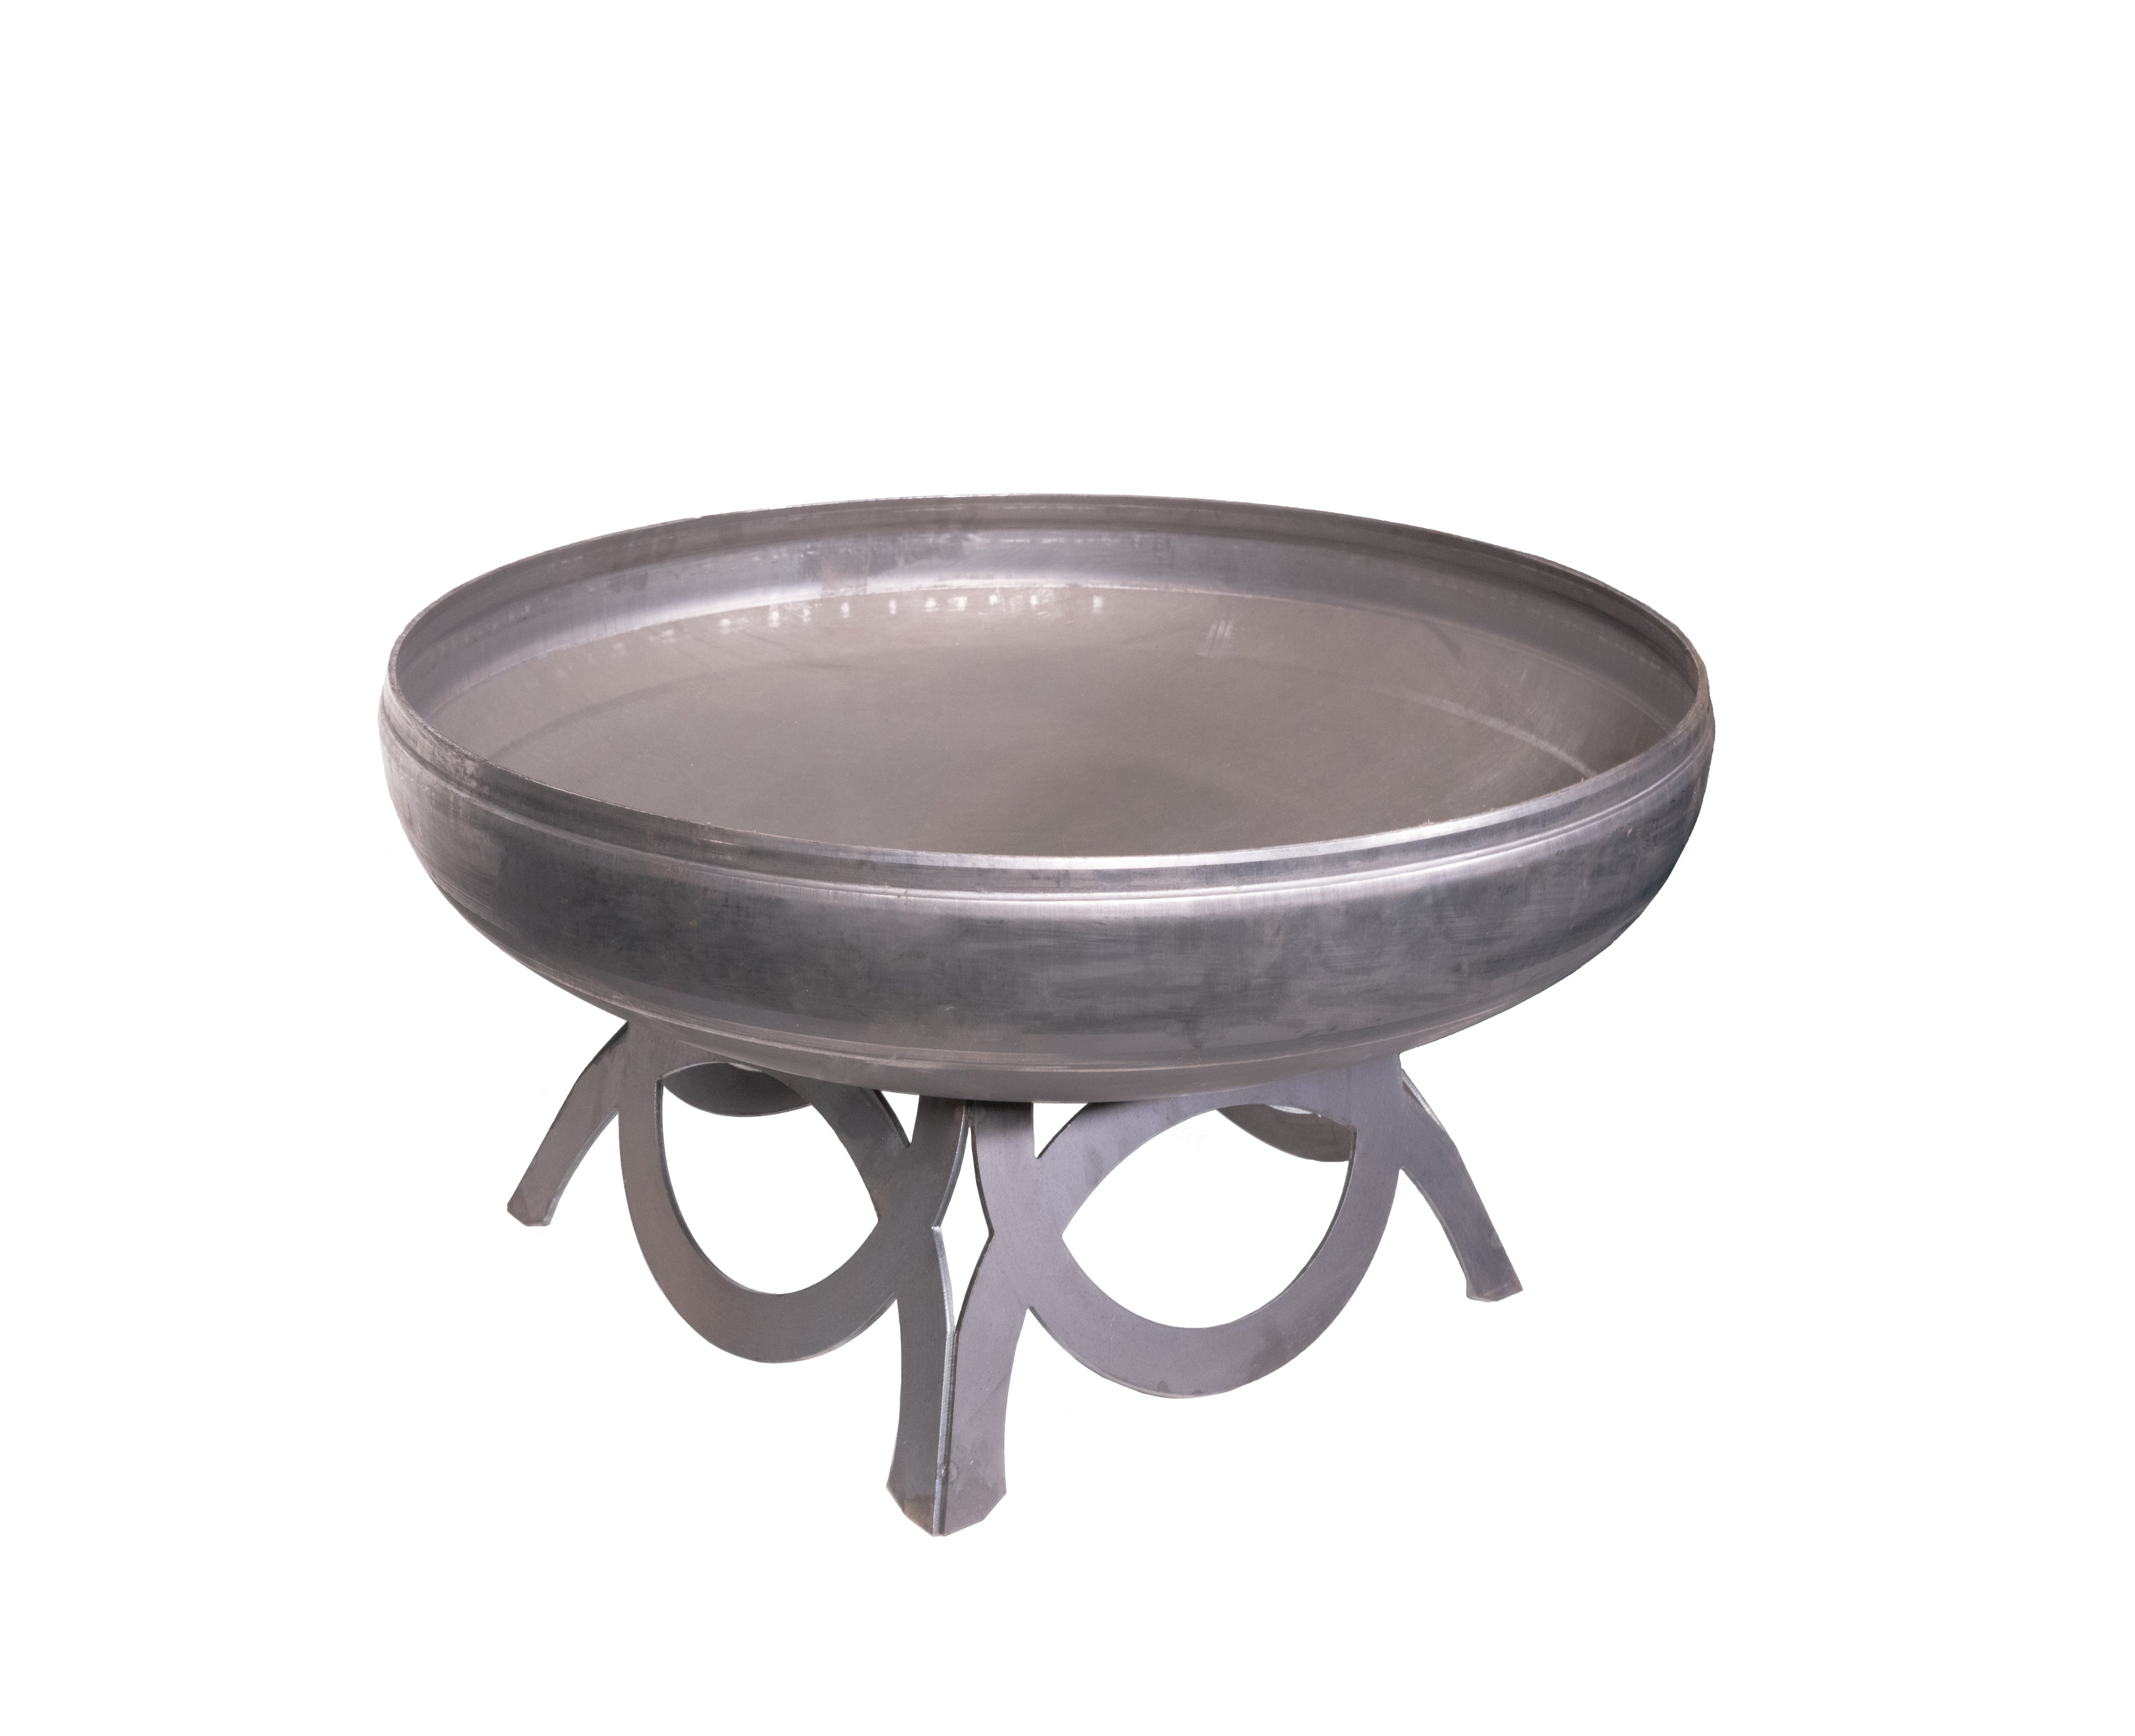 Ohio Flame Liberty Fire Pit with Curved Base- Side View